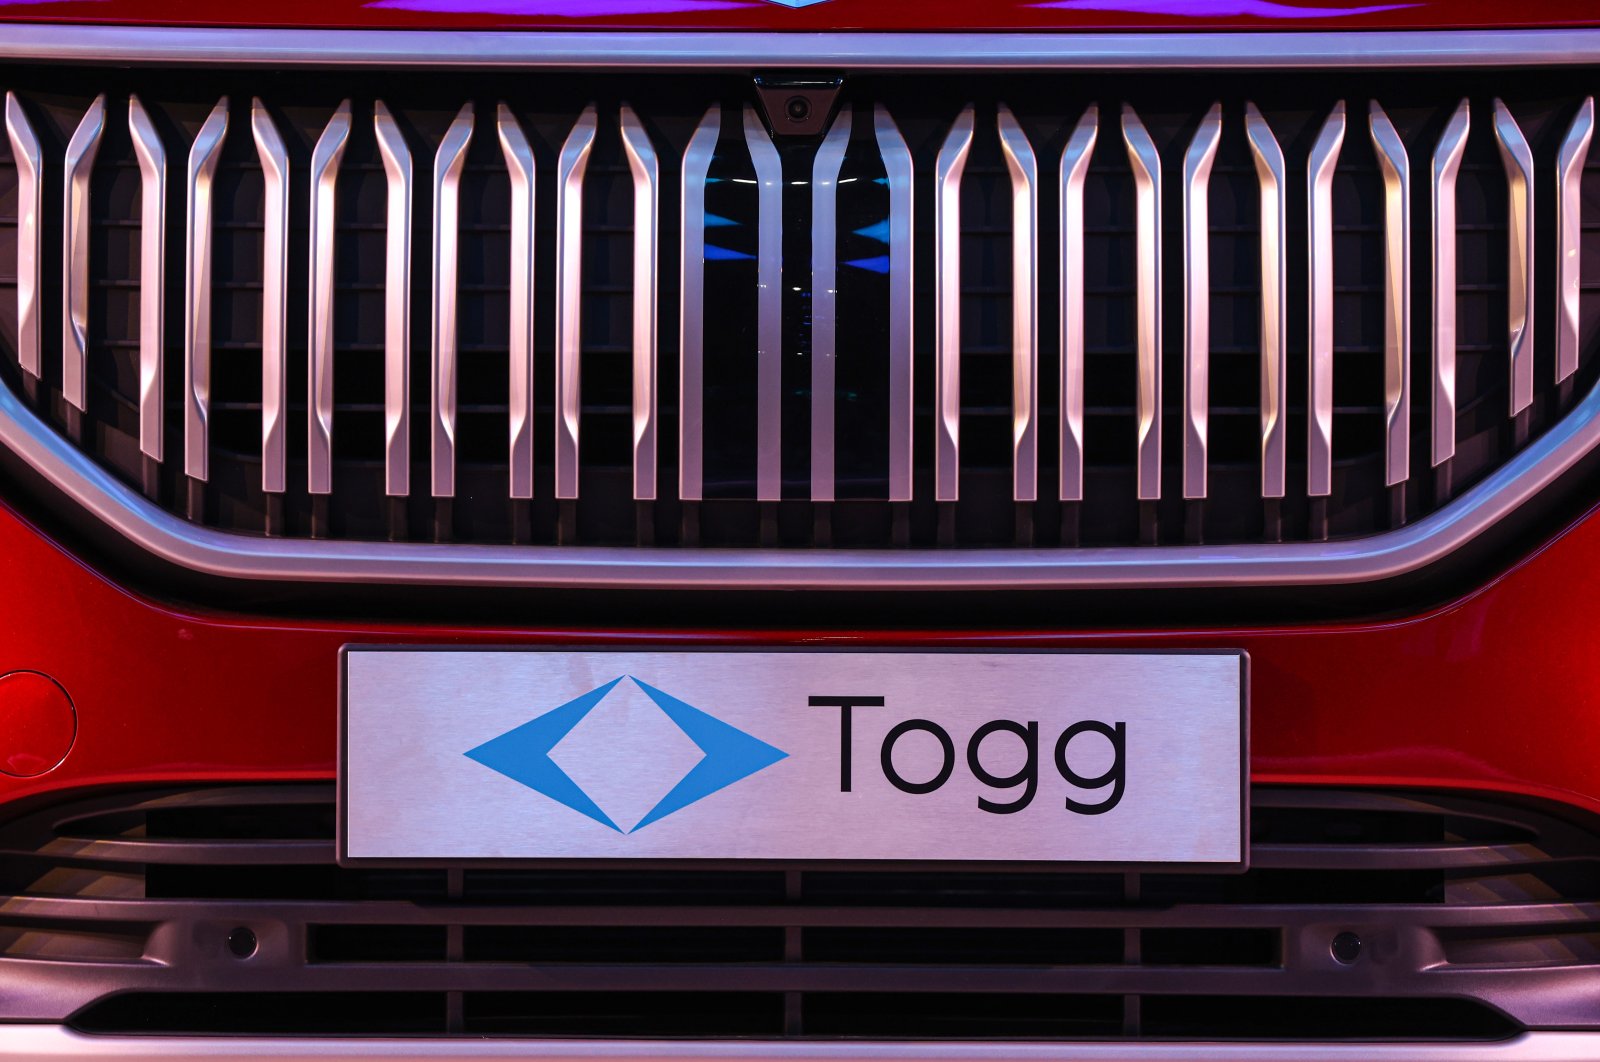 The Togg logo is seen on a license plate at the Togg introduction ceremony that took place in Gemlik, Türkiye, Oct., 29, 2022. (AA Photo)